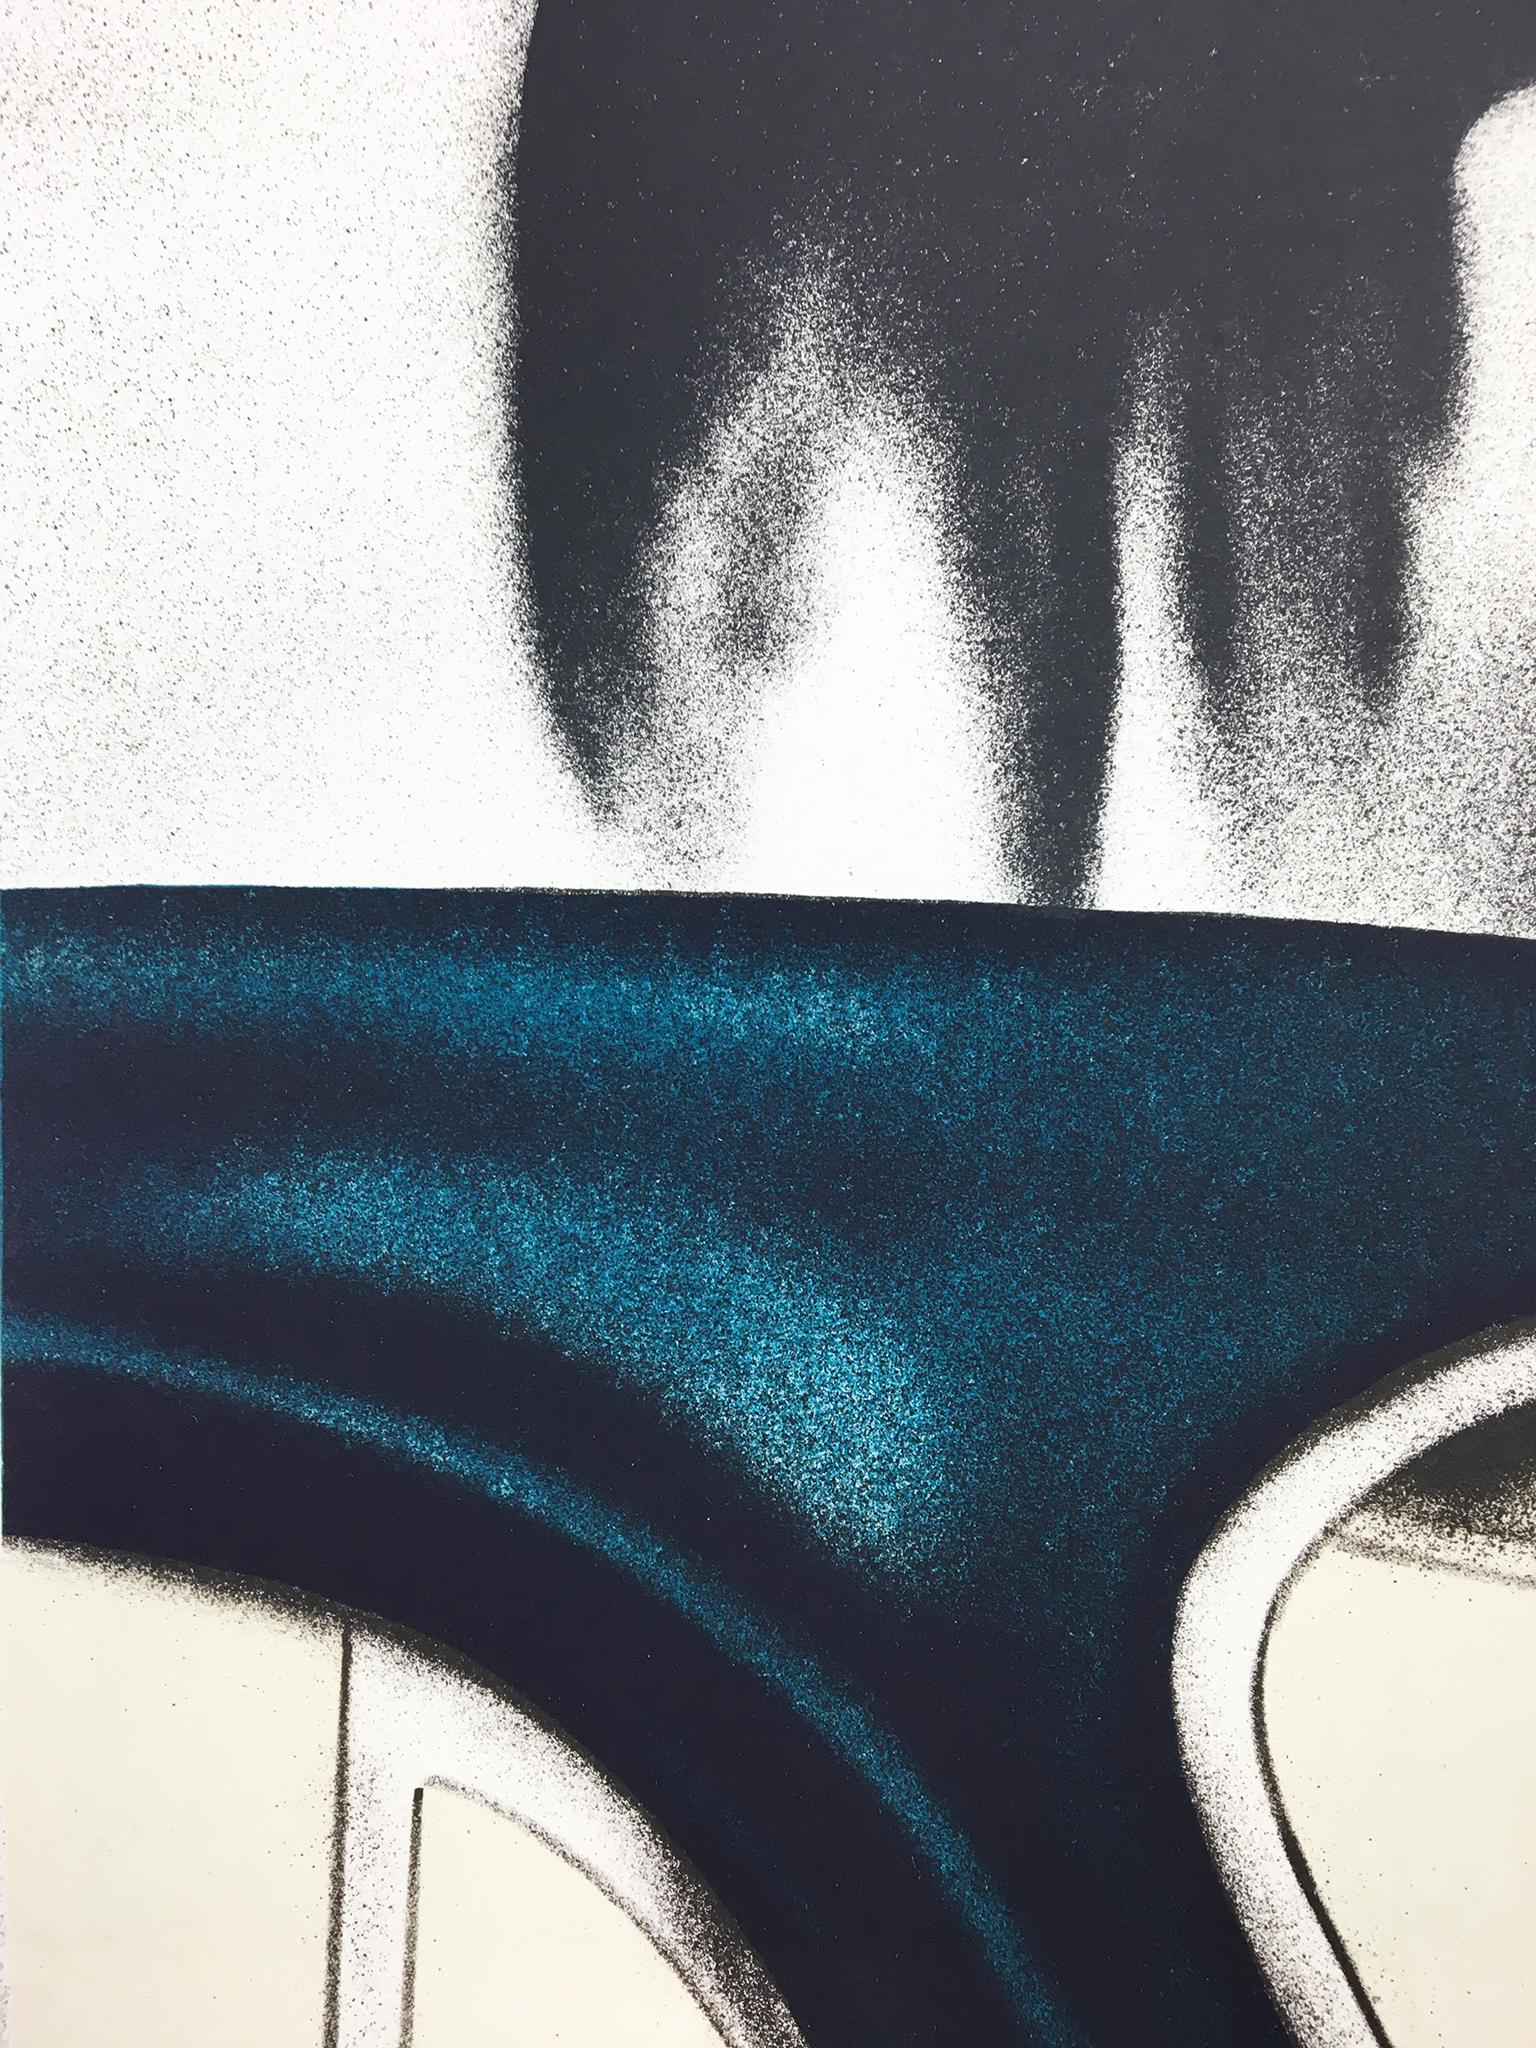 Tube James Rosenquist Black and white abstract Pop art chrome based on painting For Sale 3